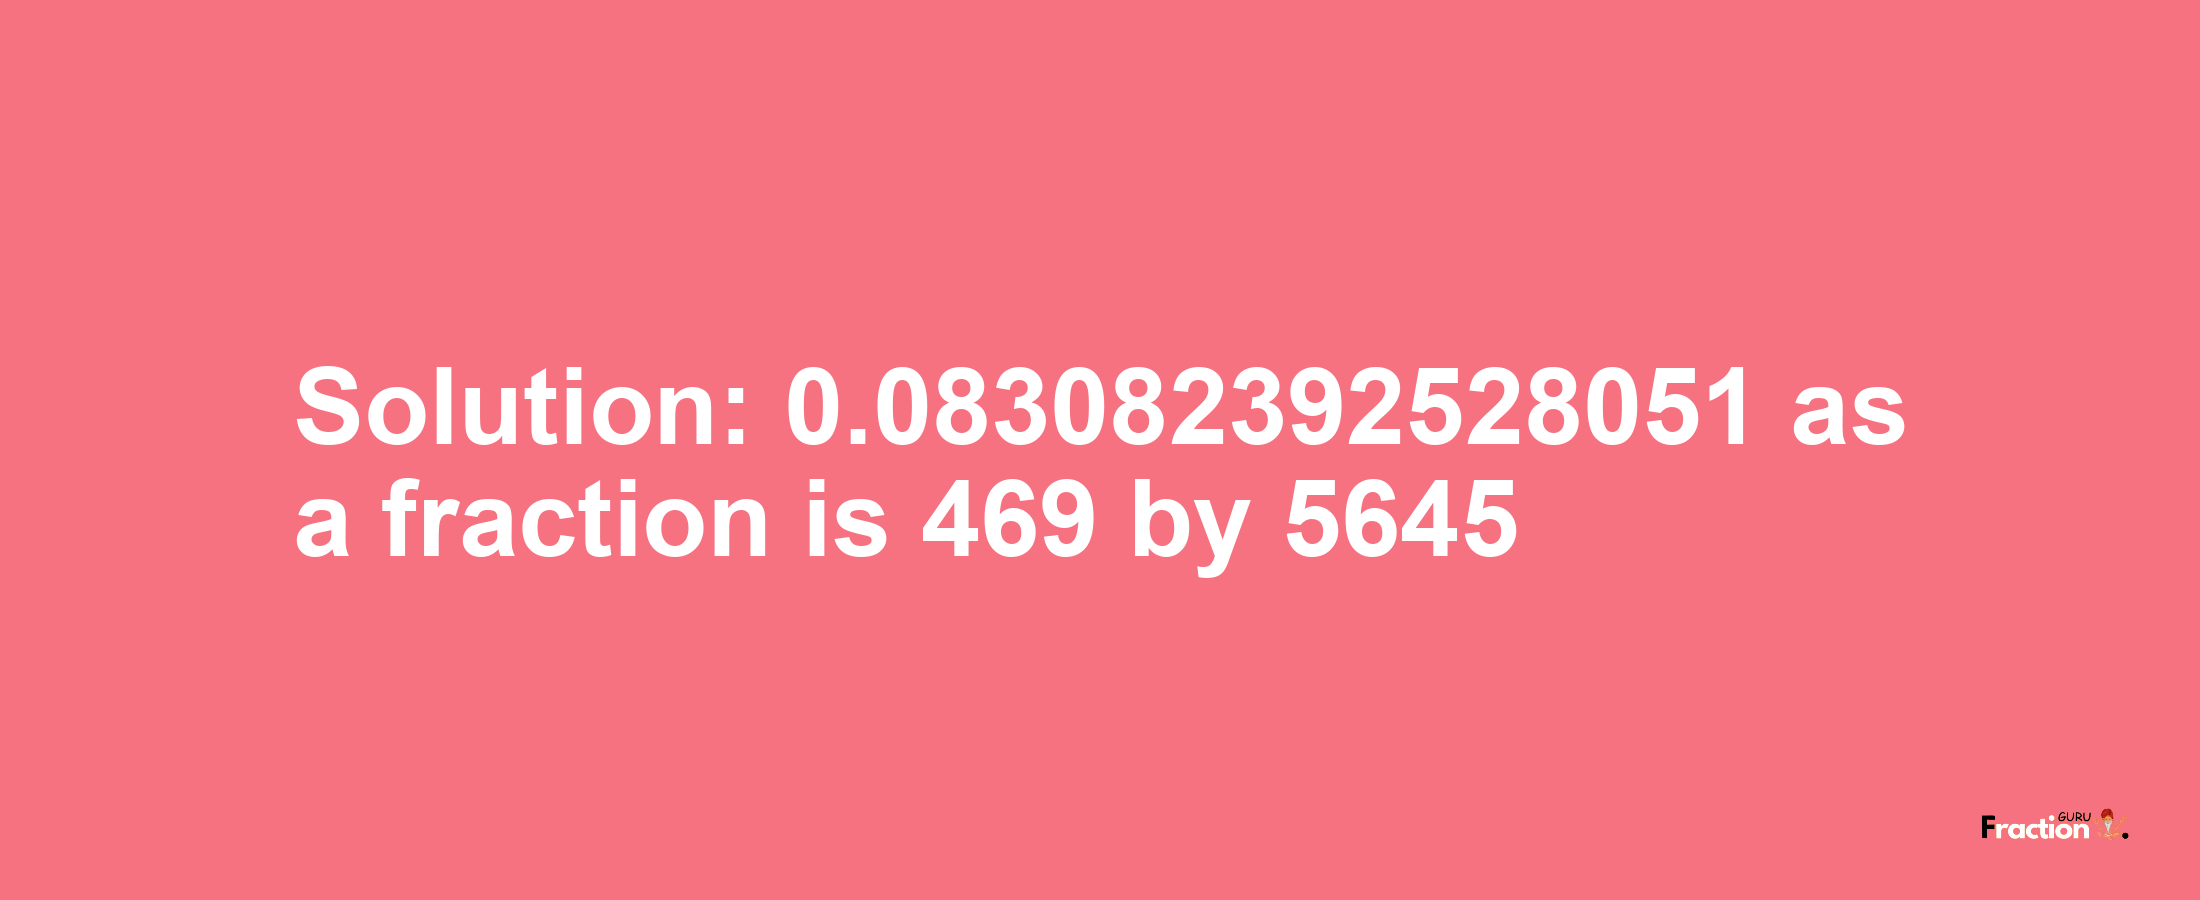 Solution:0.083082392528051 as a fraction is 469/5645